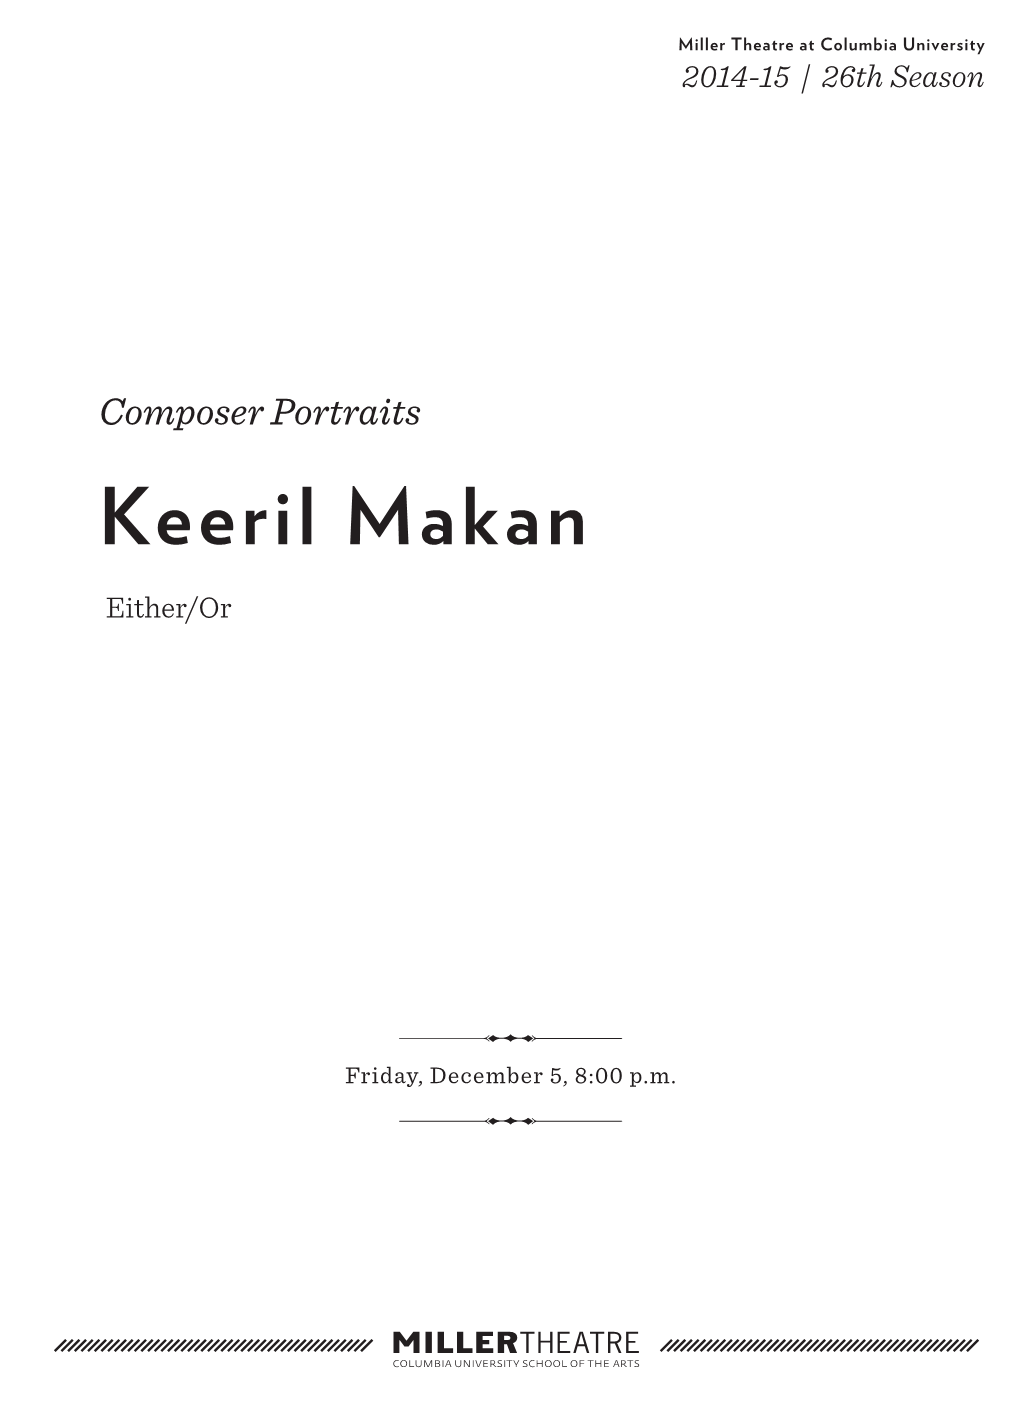 Keeril Makan Either/Or